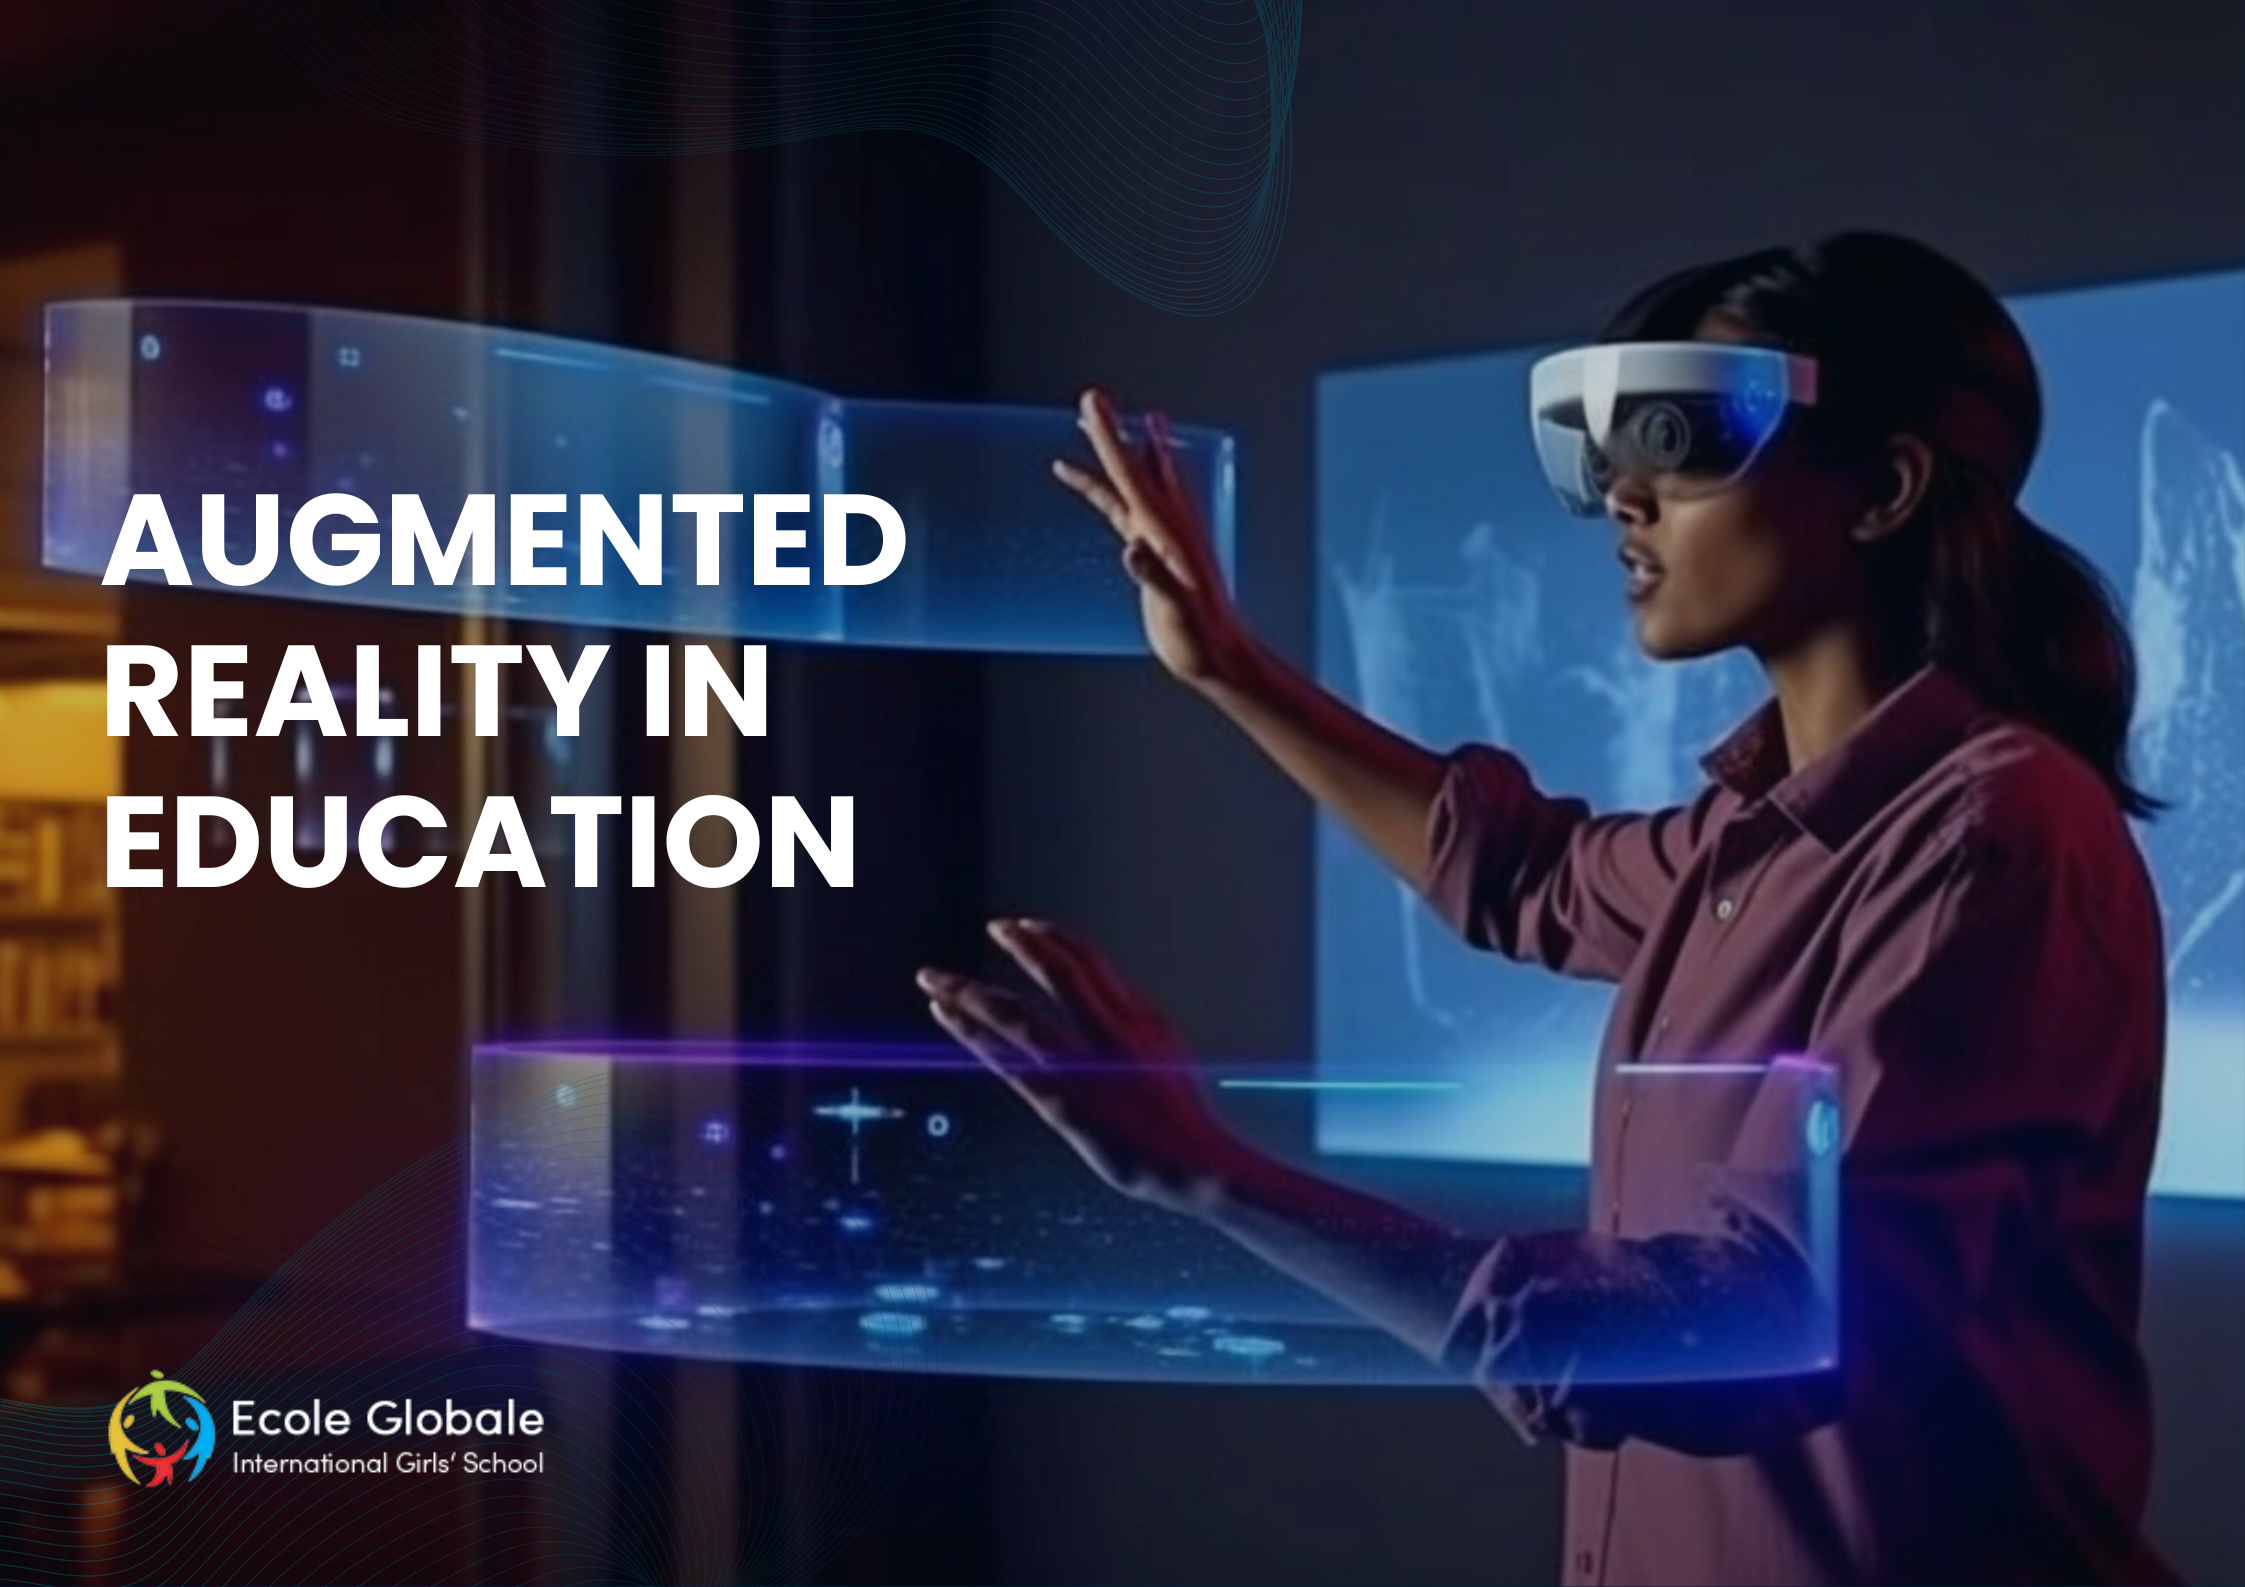 You are currently viewing Augmented Reality in Education: Bringing Textbooks to Life at Ecole Globale